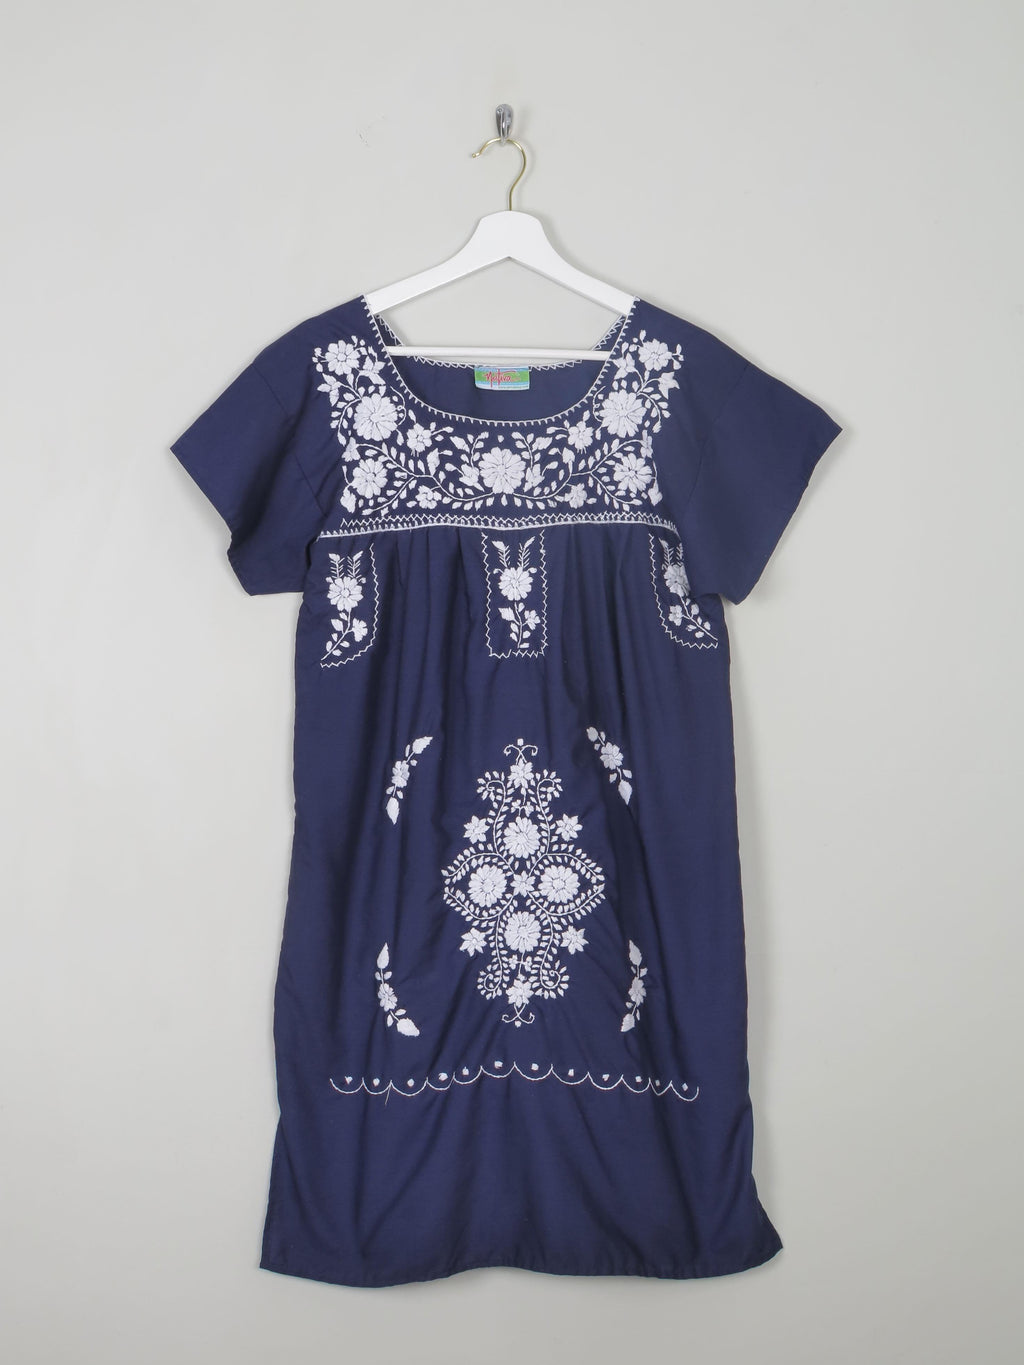 Vintage Navy & Blue Embroidered Mexican Dress S/M - The Harlequin